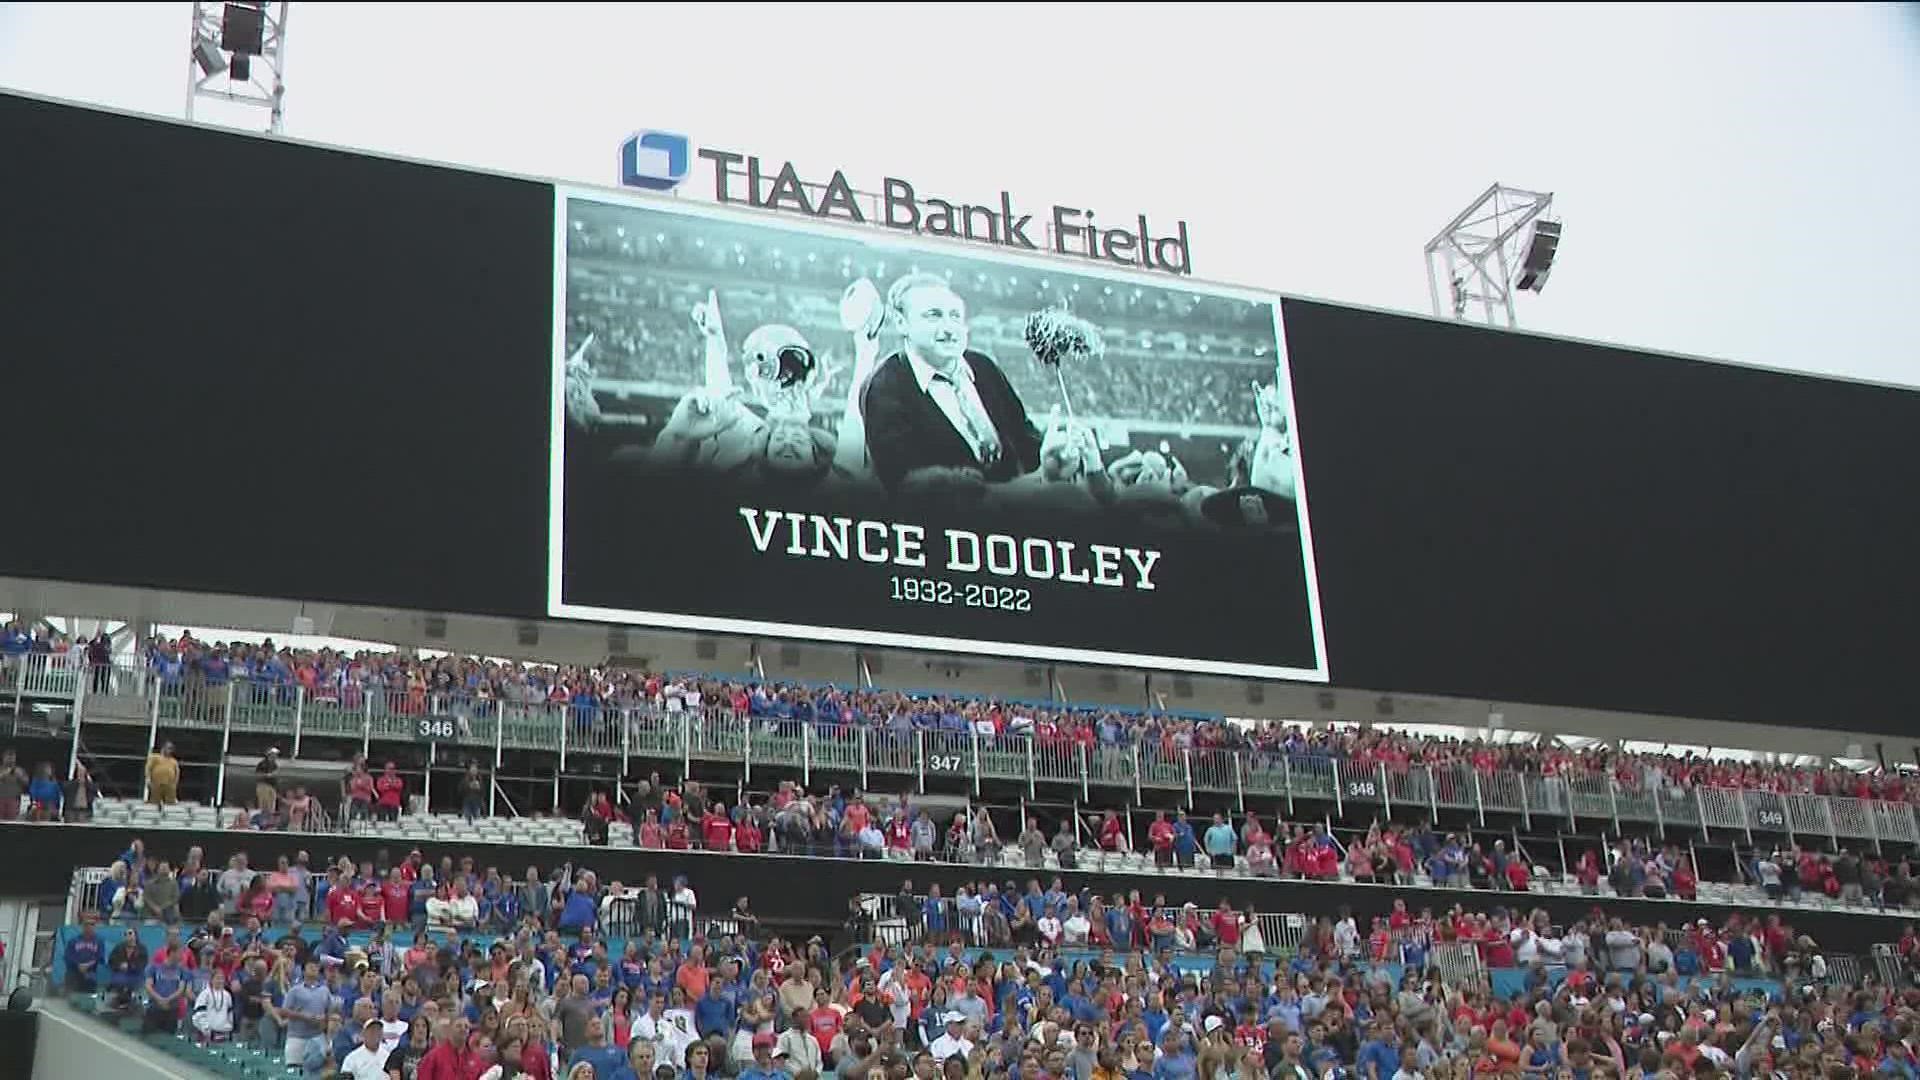 Fans of both teams honored the legendary Georgia head football coach before the game. Dooley died peacefully Friday at age 90.